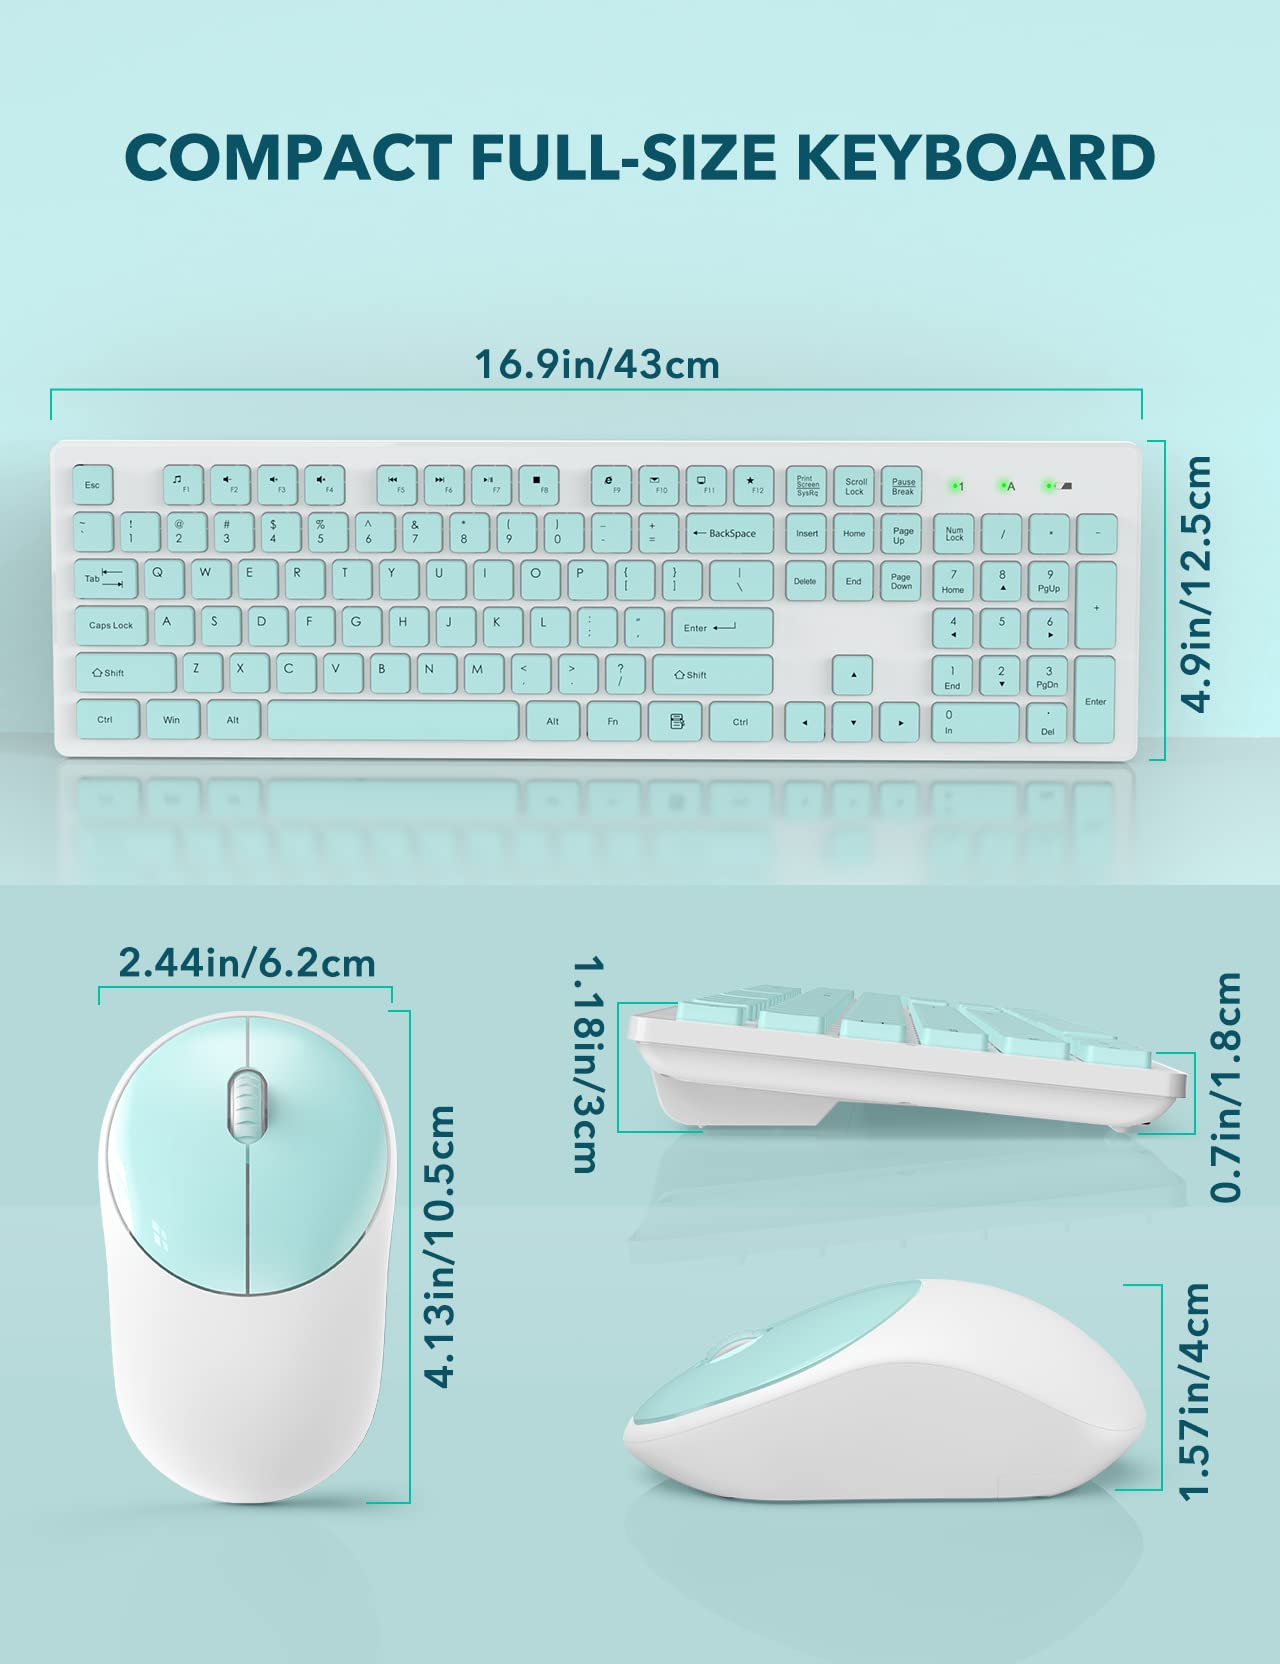 Wireless Keyboard and Mouse, WisFox Full-Size Wireless Mouse and Keyboard Combo, 2.4GHz Silent USB Wireless Keyboard Mouse Combo for PC Desktops Computer, Laptops, Windows (Mint Green and White)